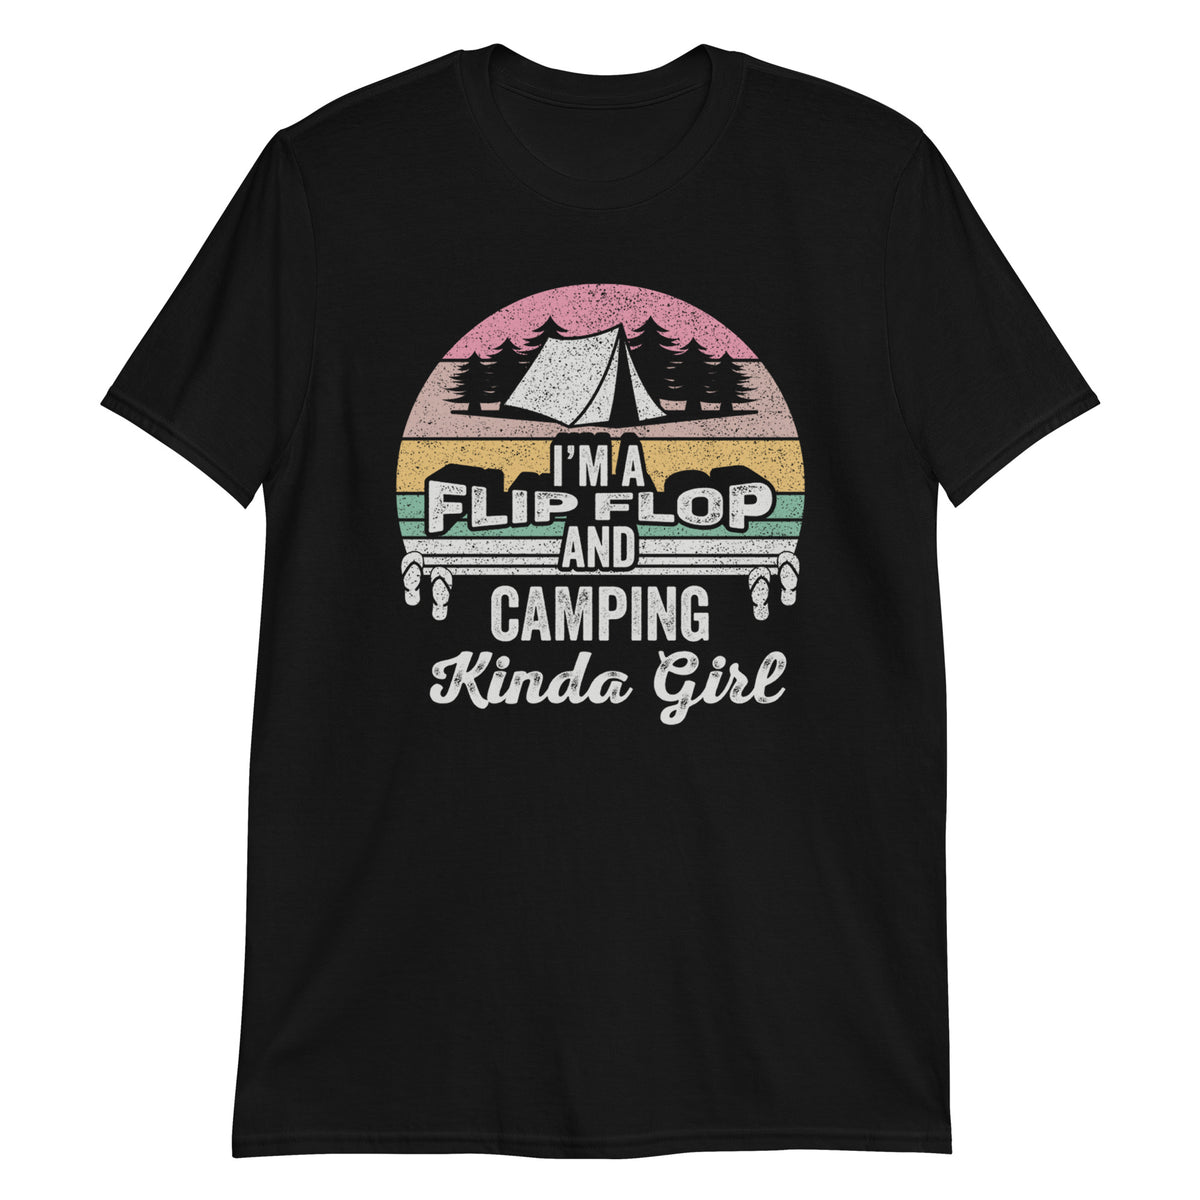 I'm a Flip Flop and Camping Kinda Girl T-Shirt